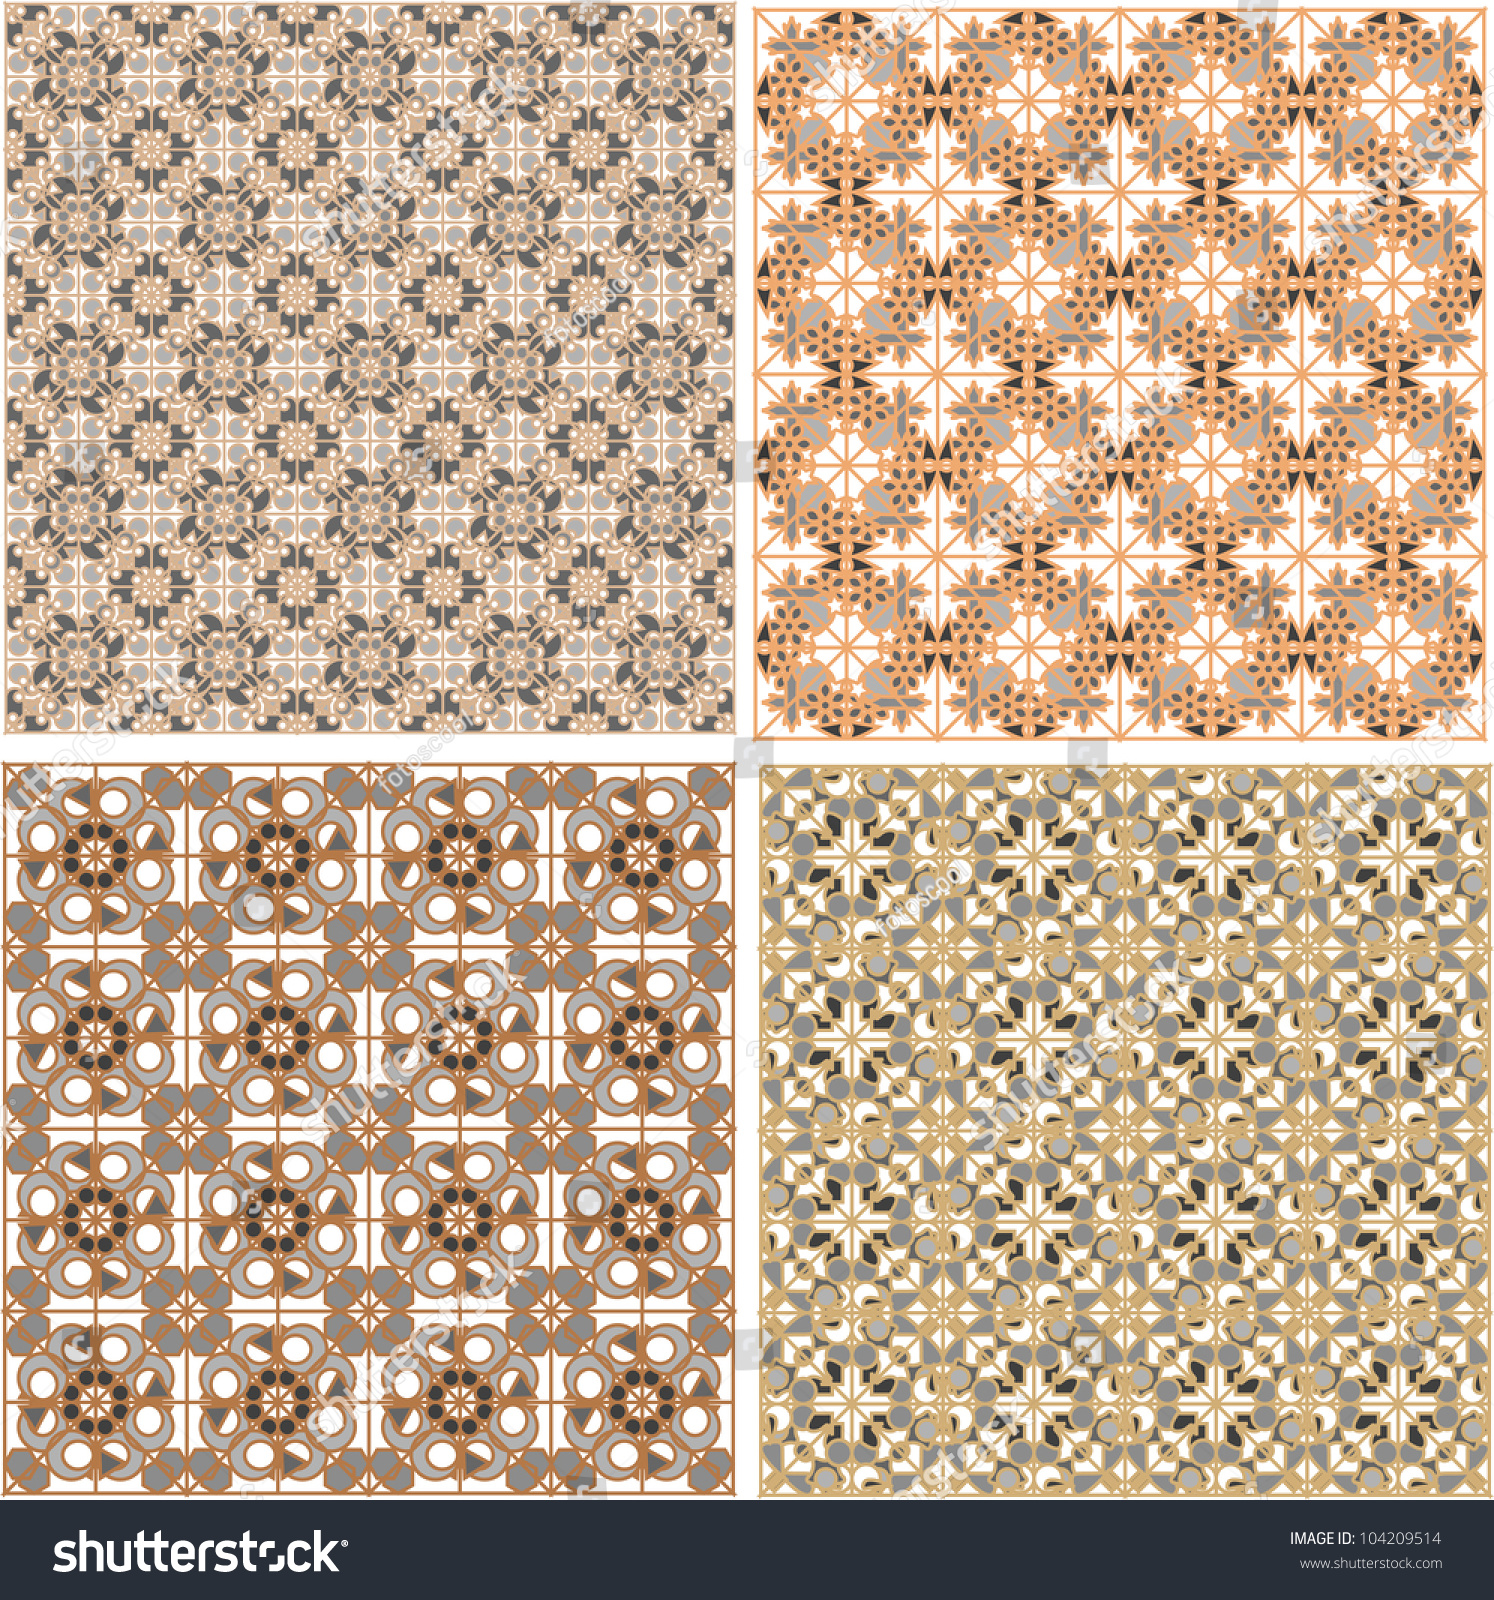 Seamless Patterns In Islamic Style. Vector Set - 104209514 : Shutterstock